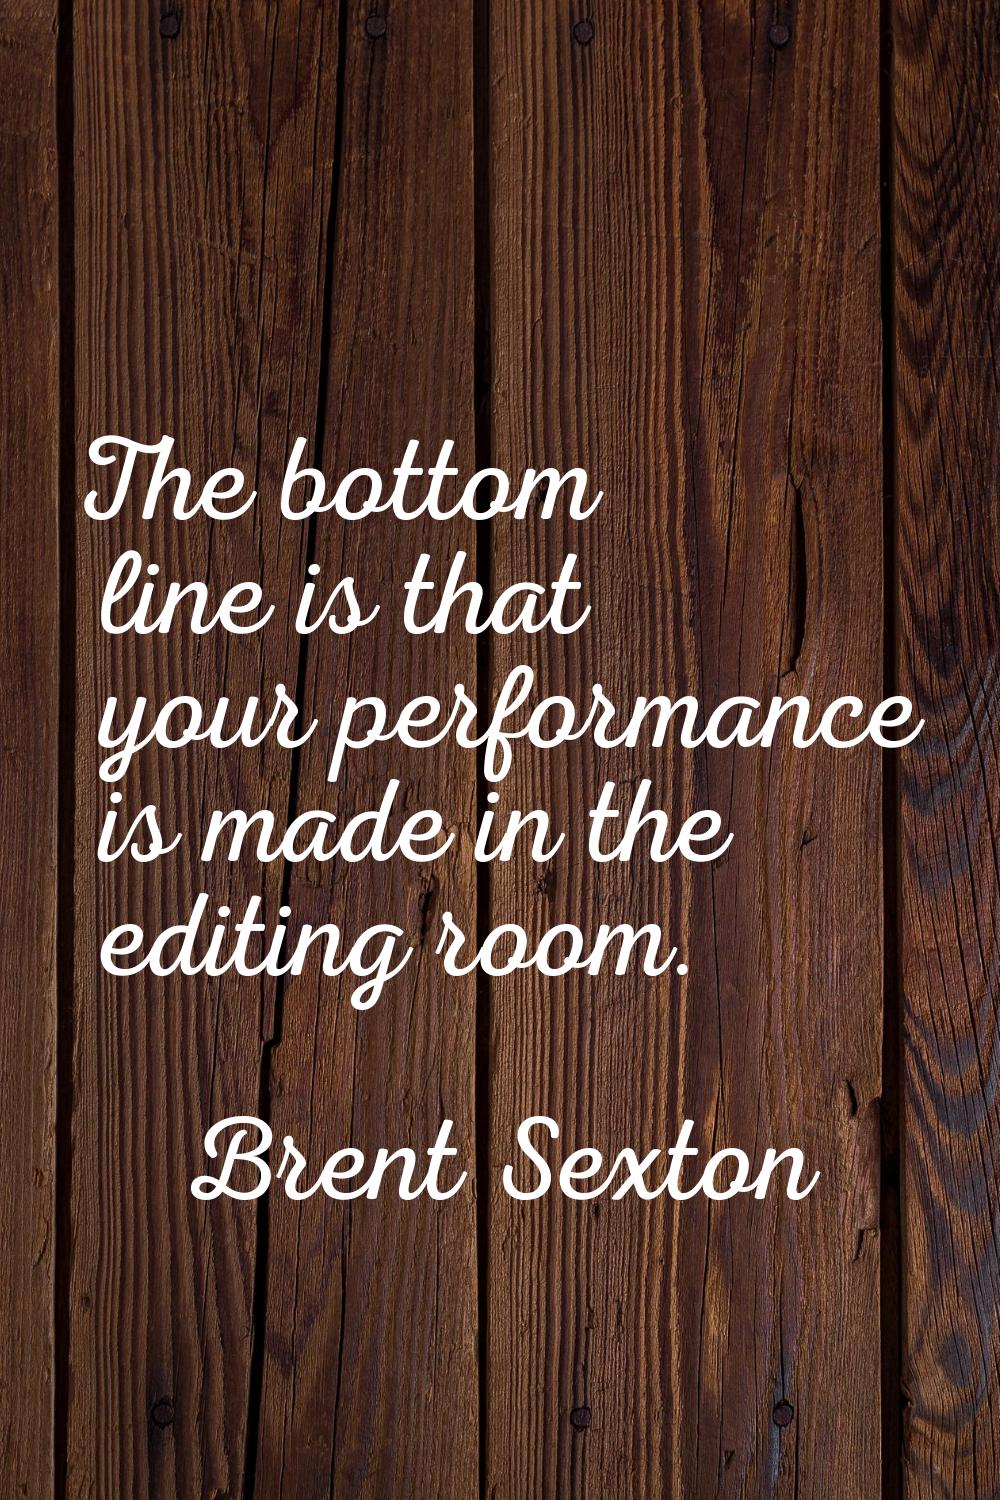 The bottom line is that your performance is made in the editing room.